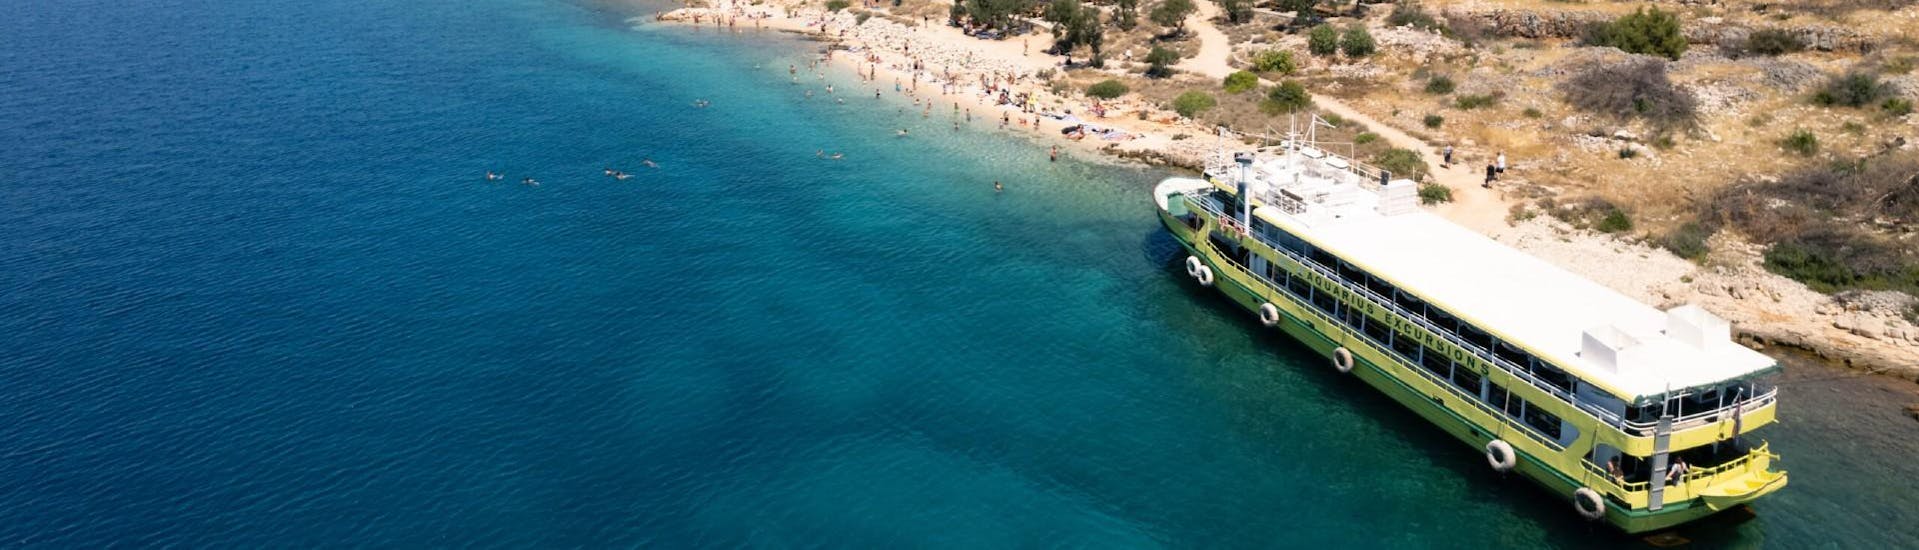 The boat of Aquarius Excursions Zadar in front of a beautiful beach during their boat tour.